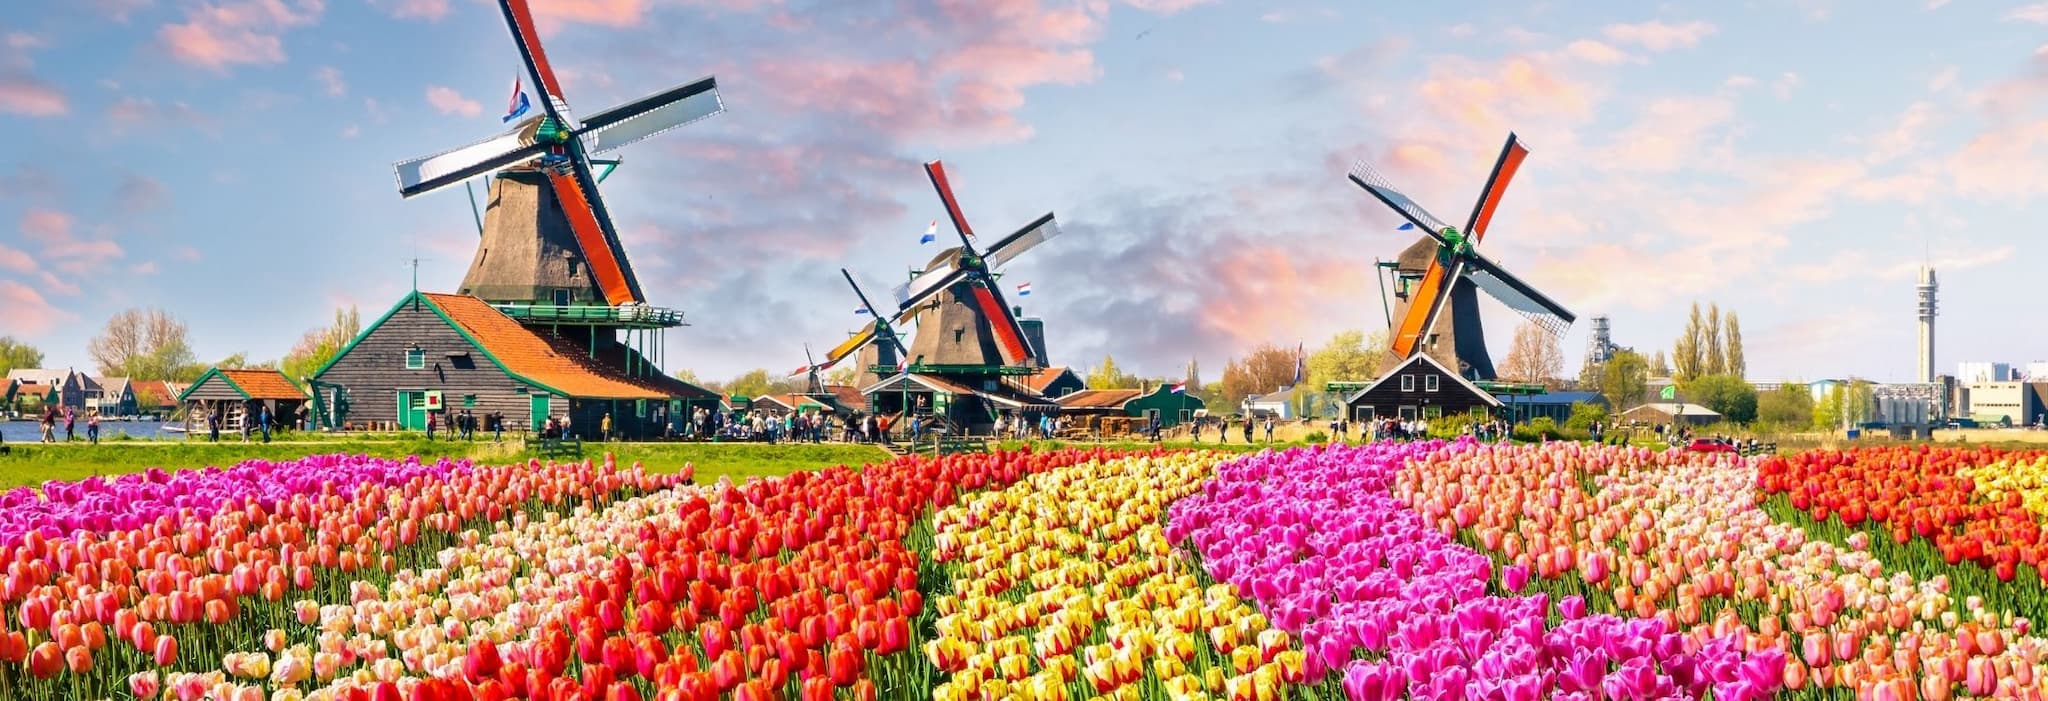 10 Things You Better Not Miss In The Netherlands